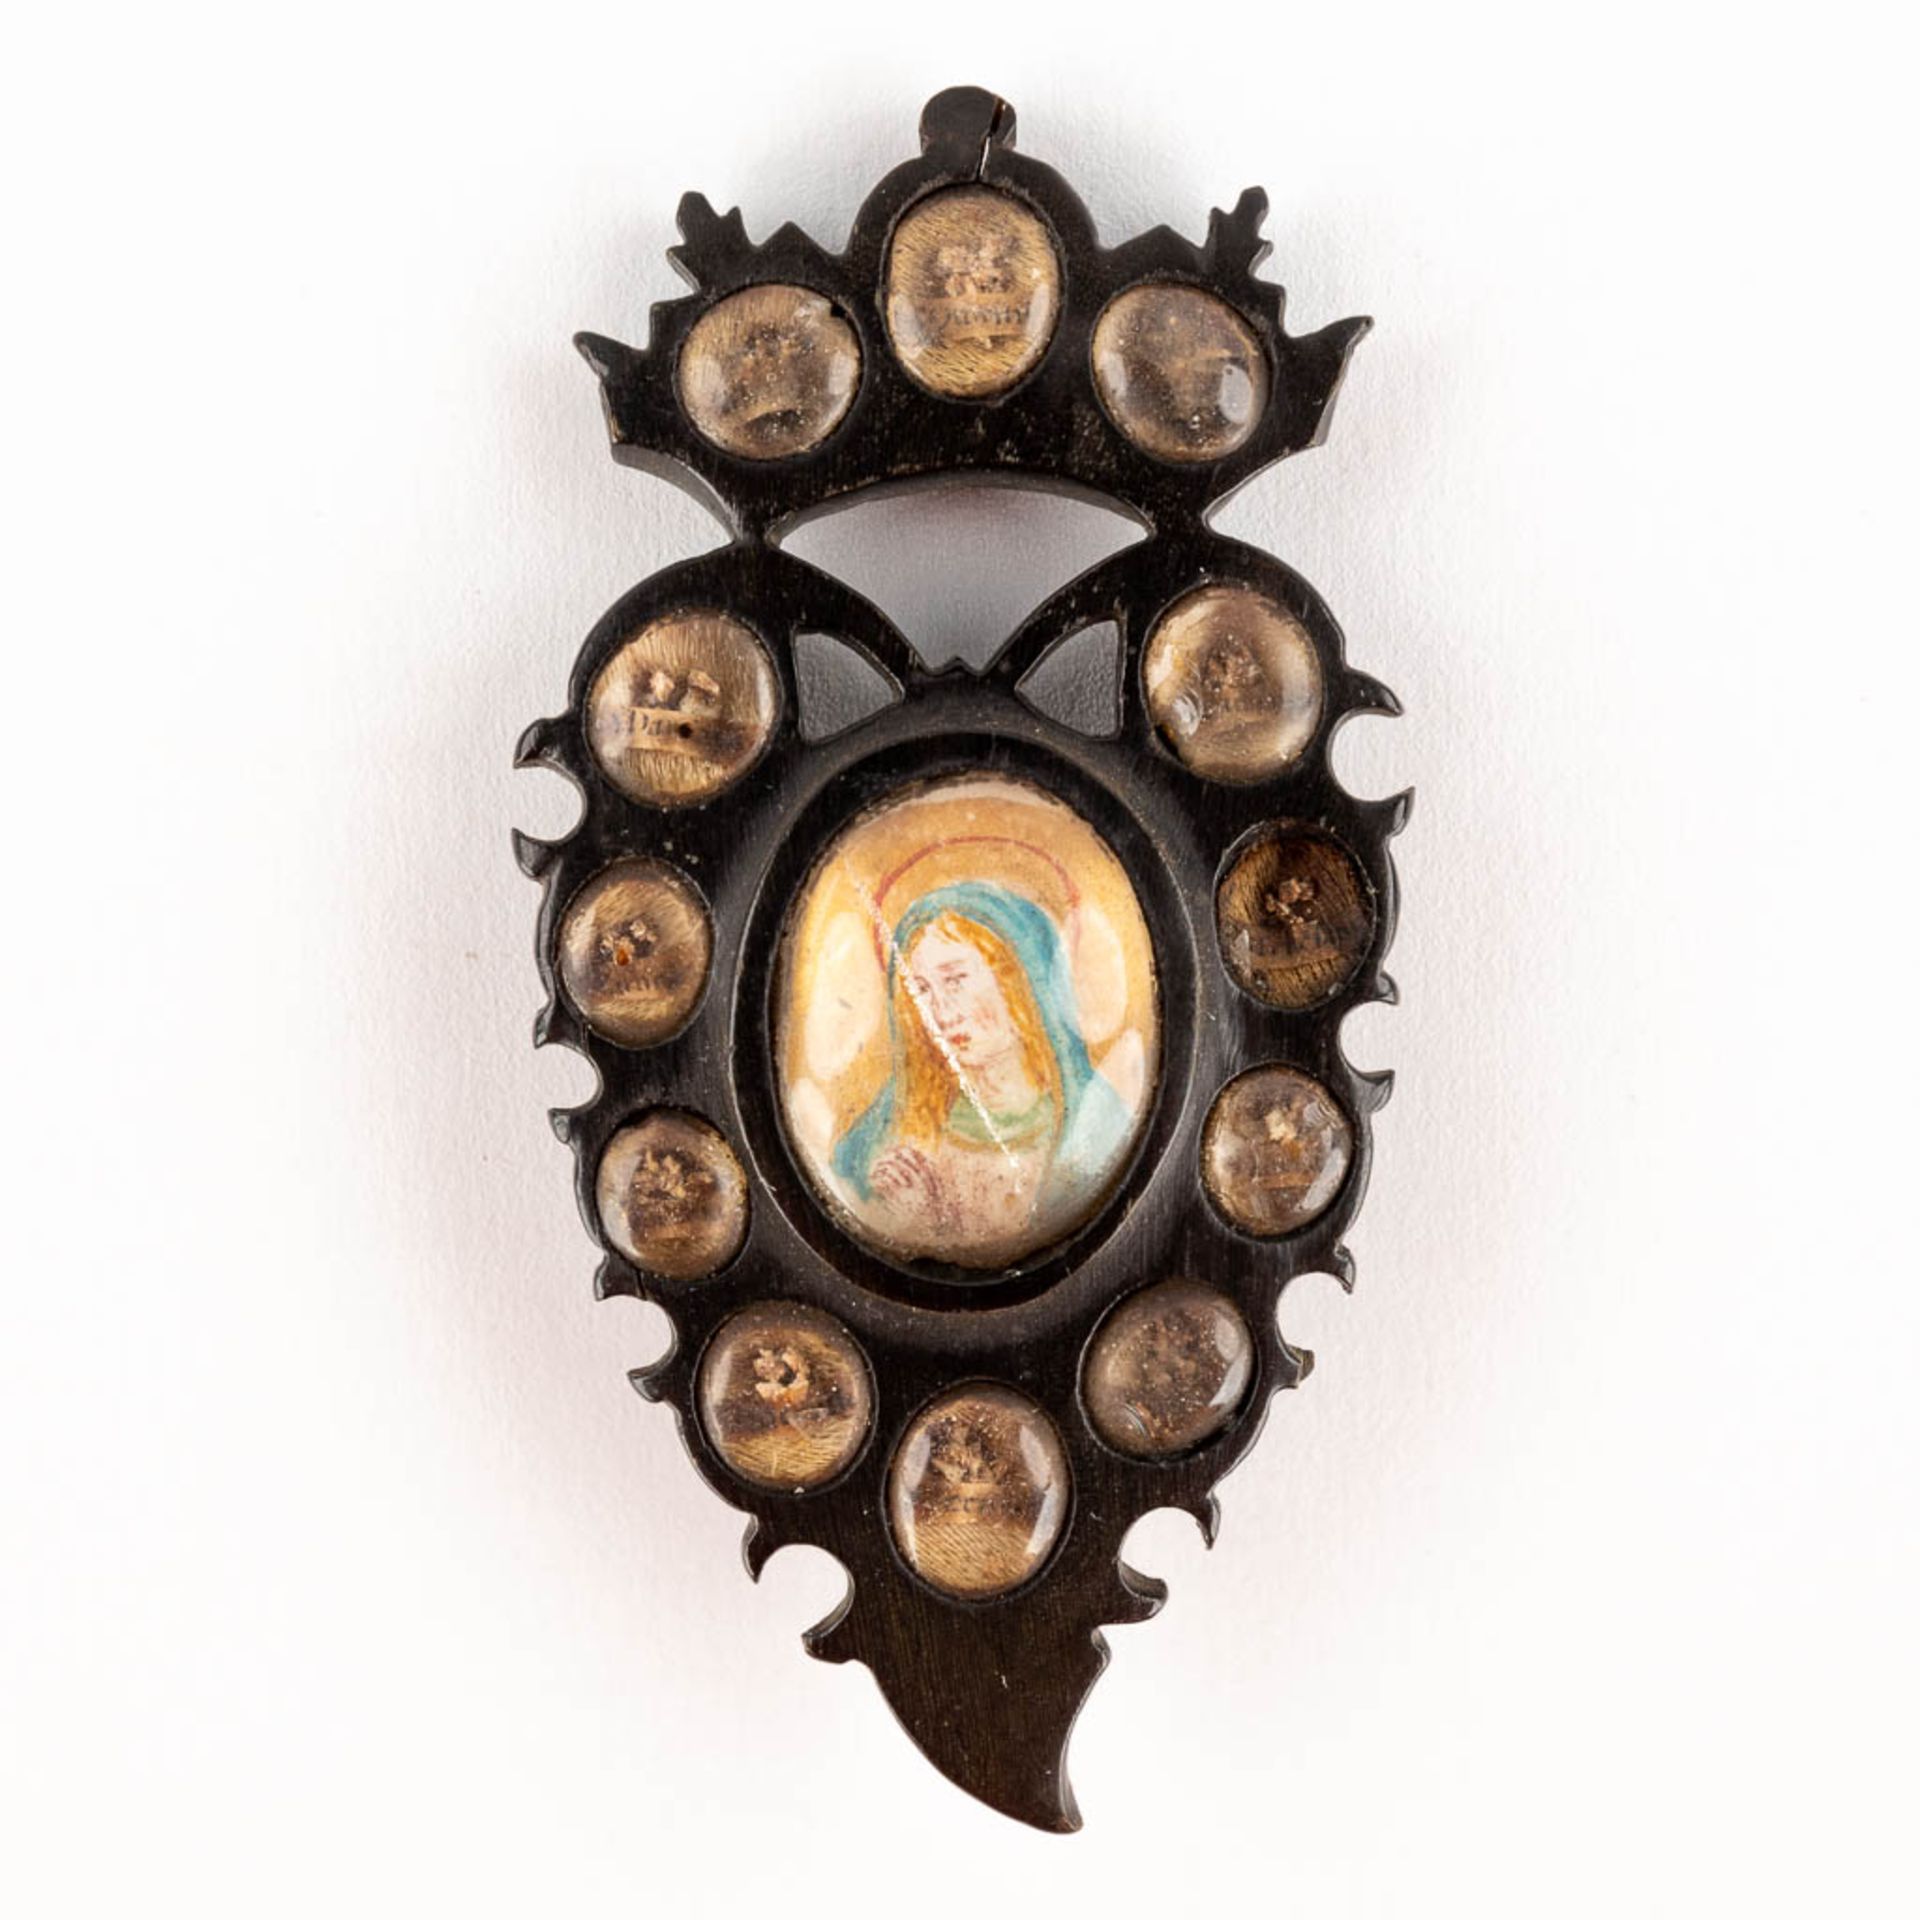 A small collection of relics and reliquary items, The Veil of Veronica, a relic in the shape of a sa - Bild 3 aus 11